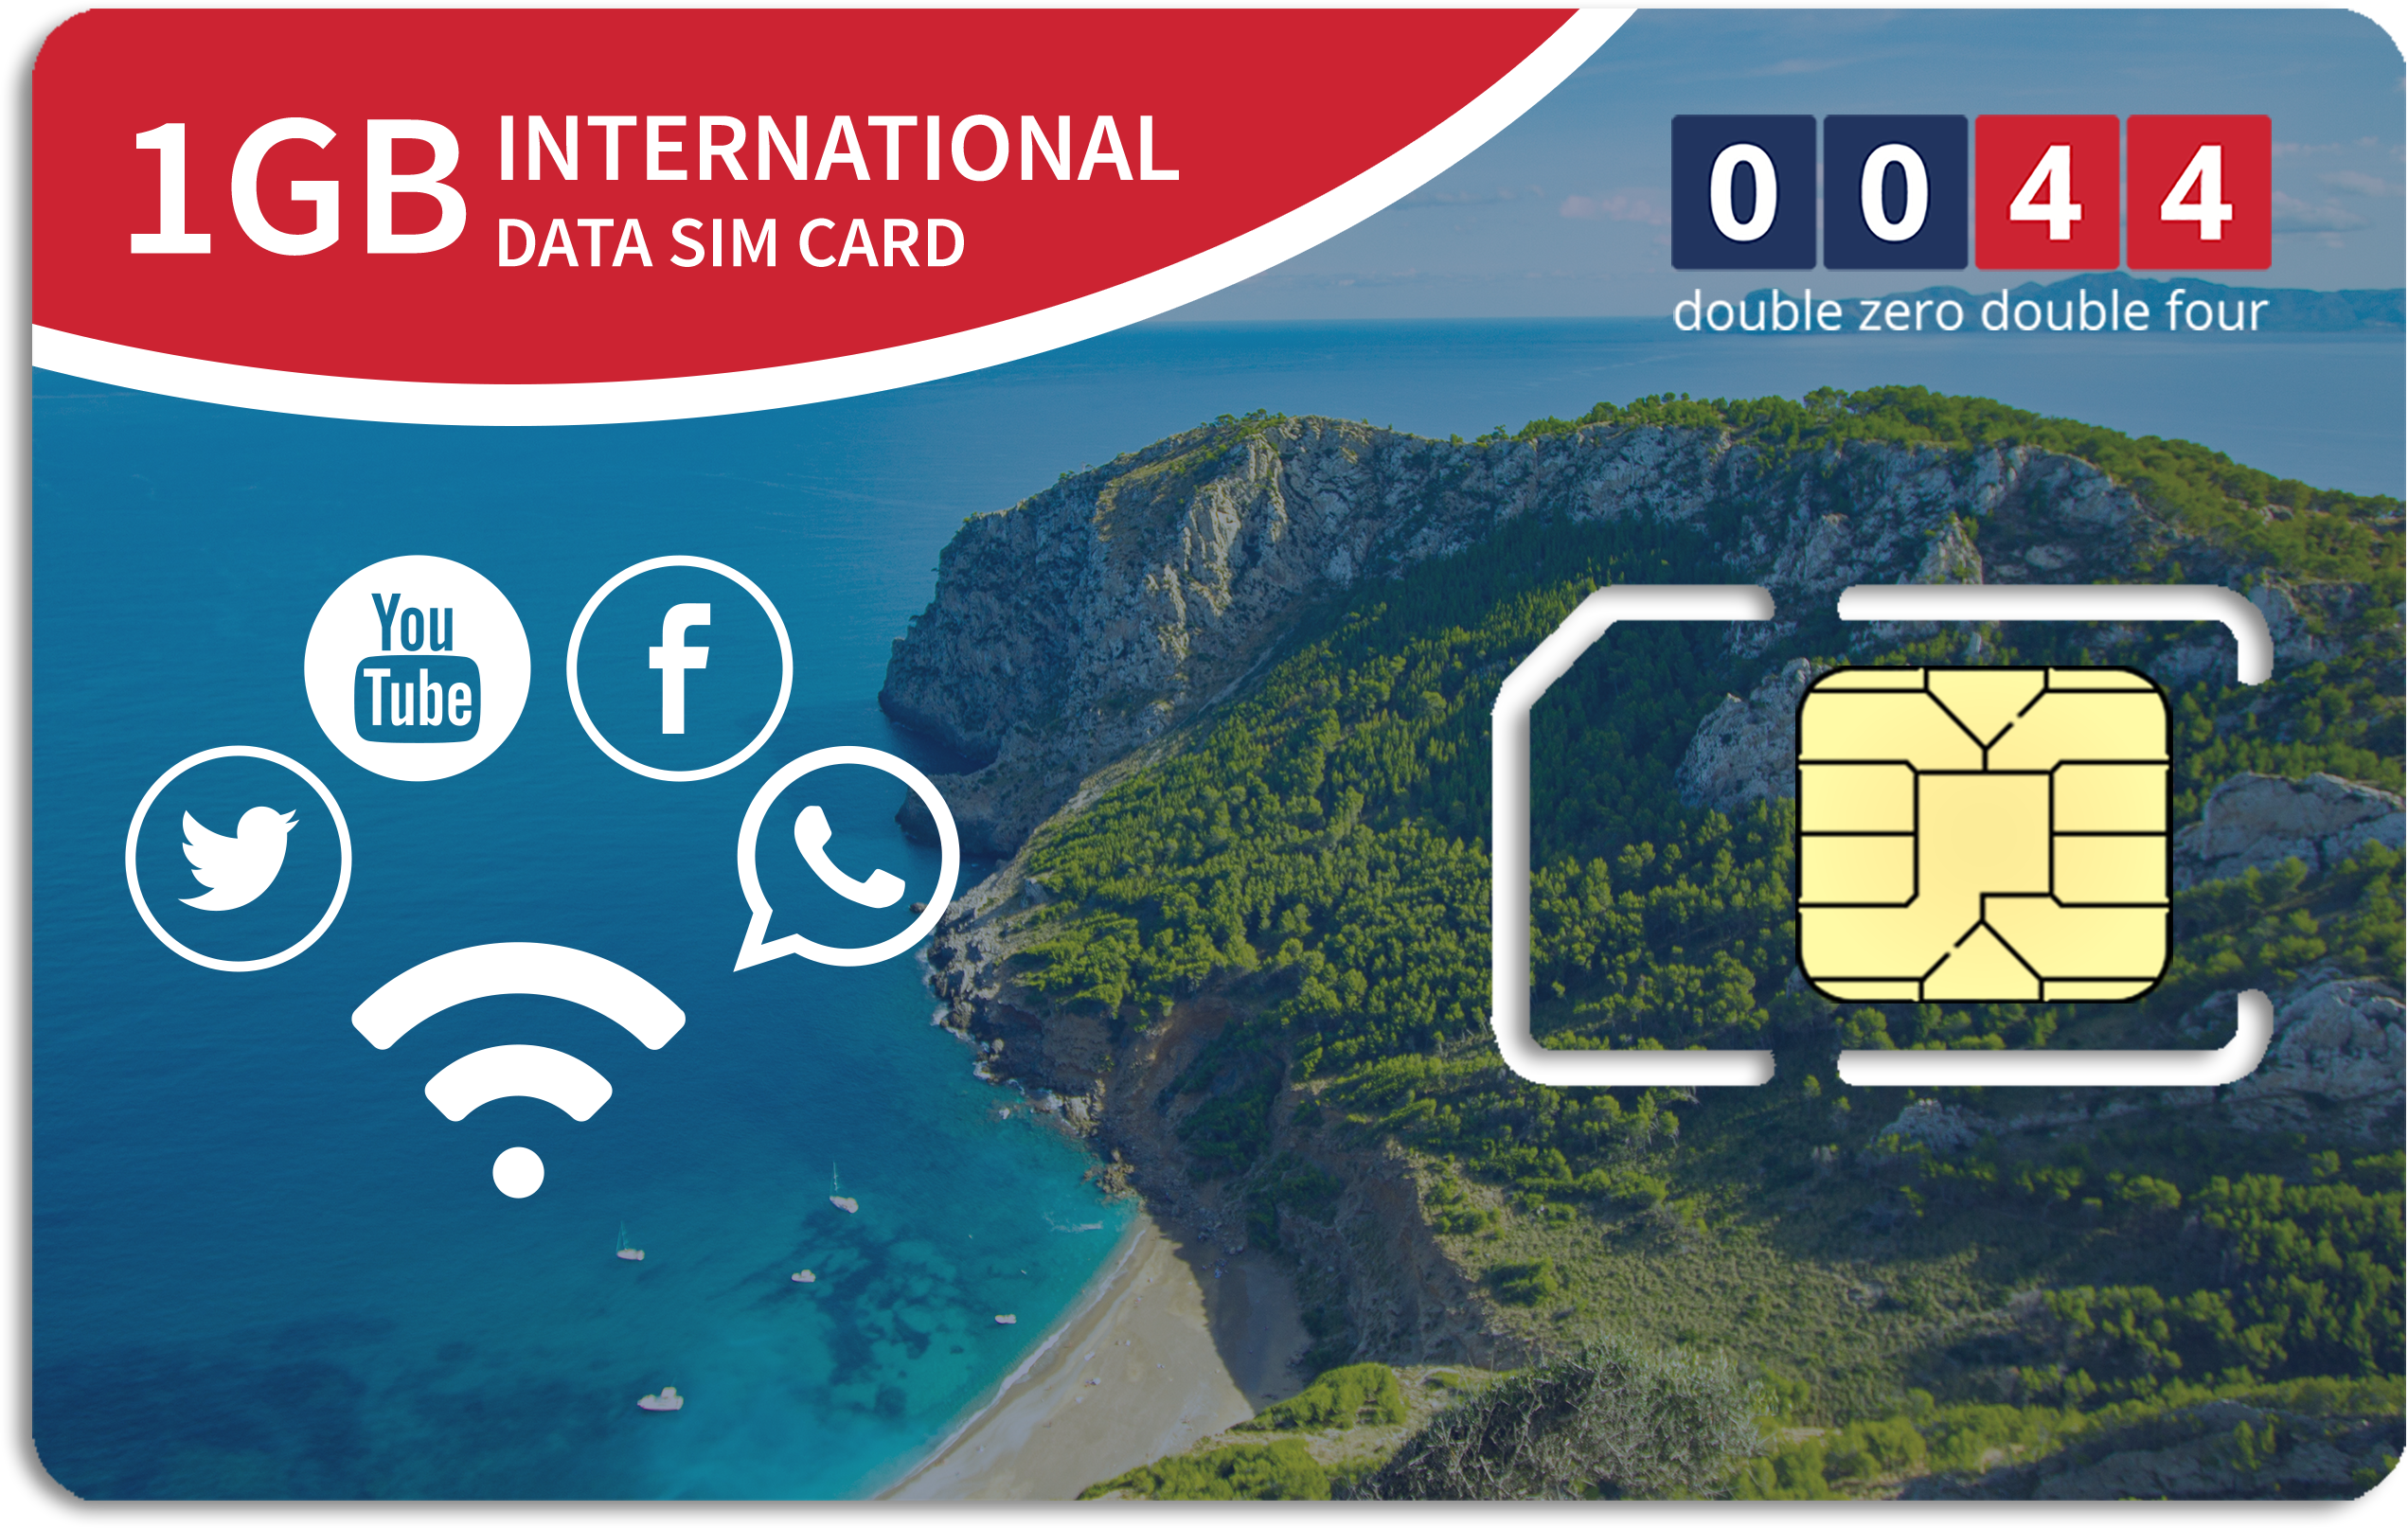 USA SIM card - Works in 220 Countries - Includes $30.00 Credit